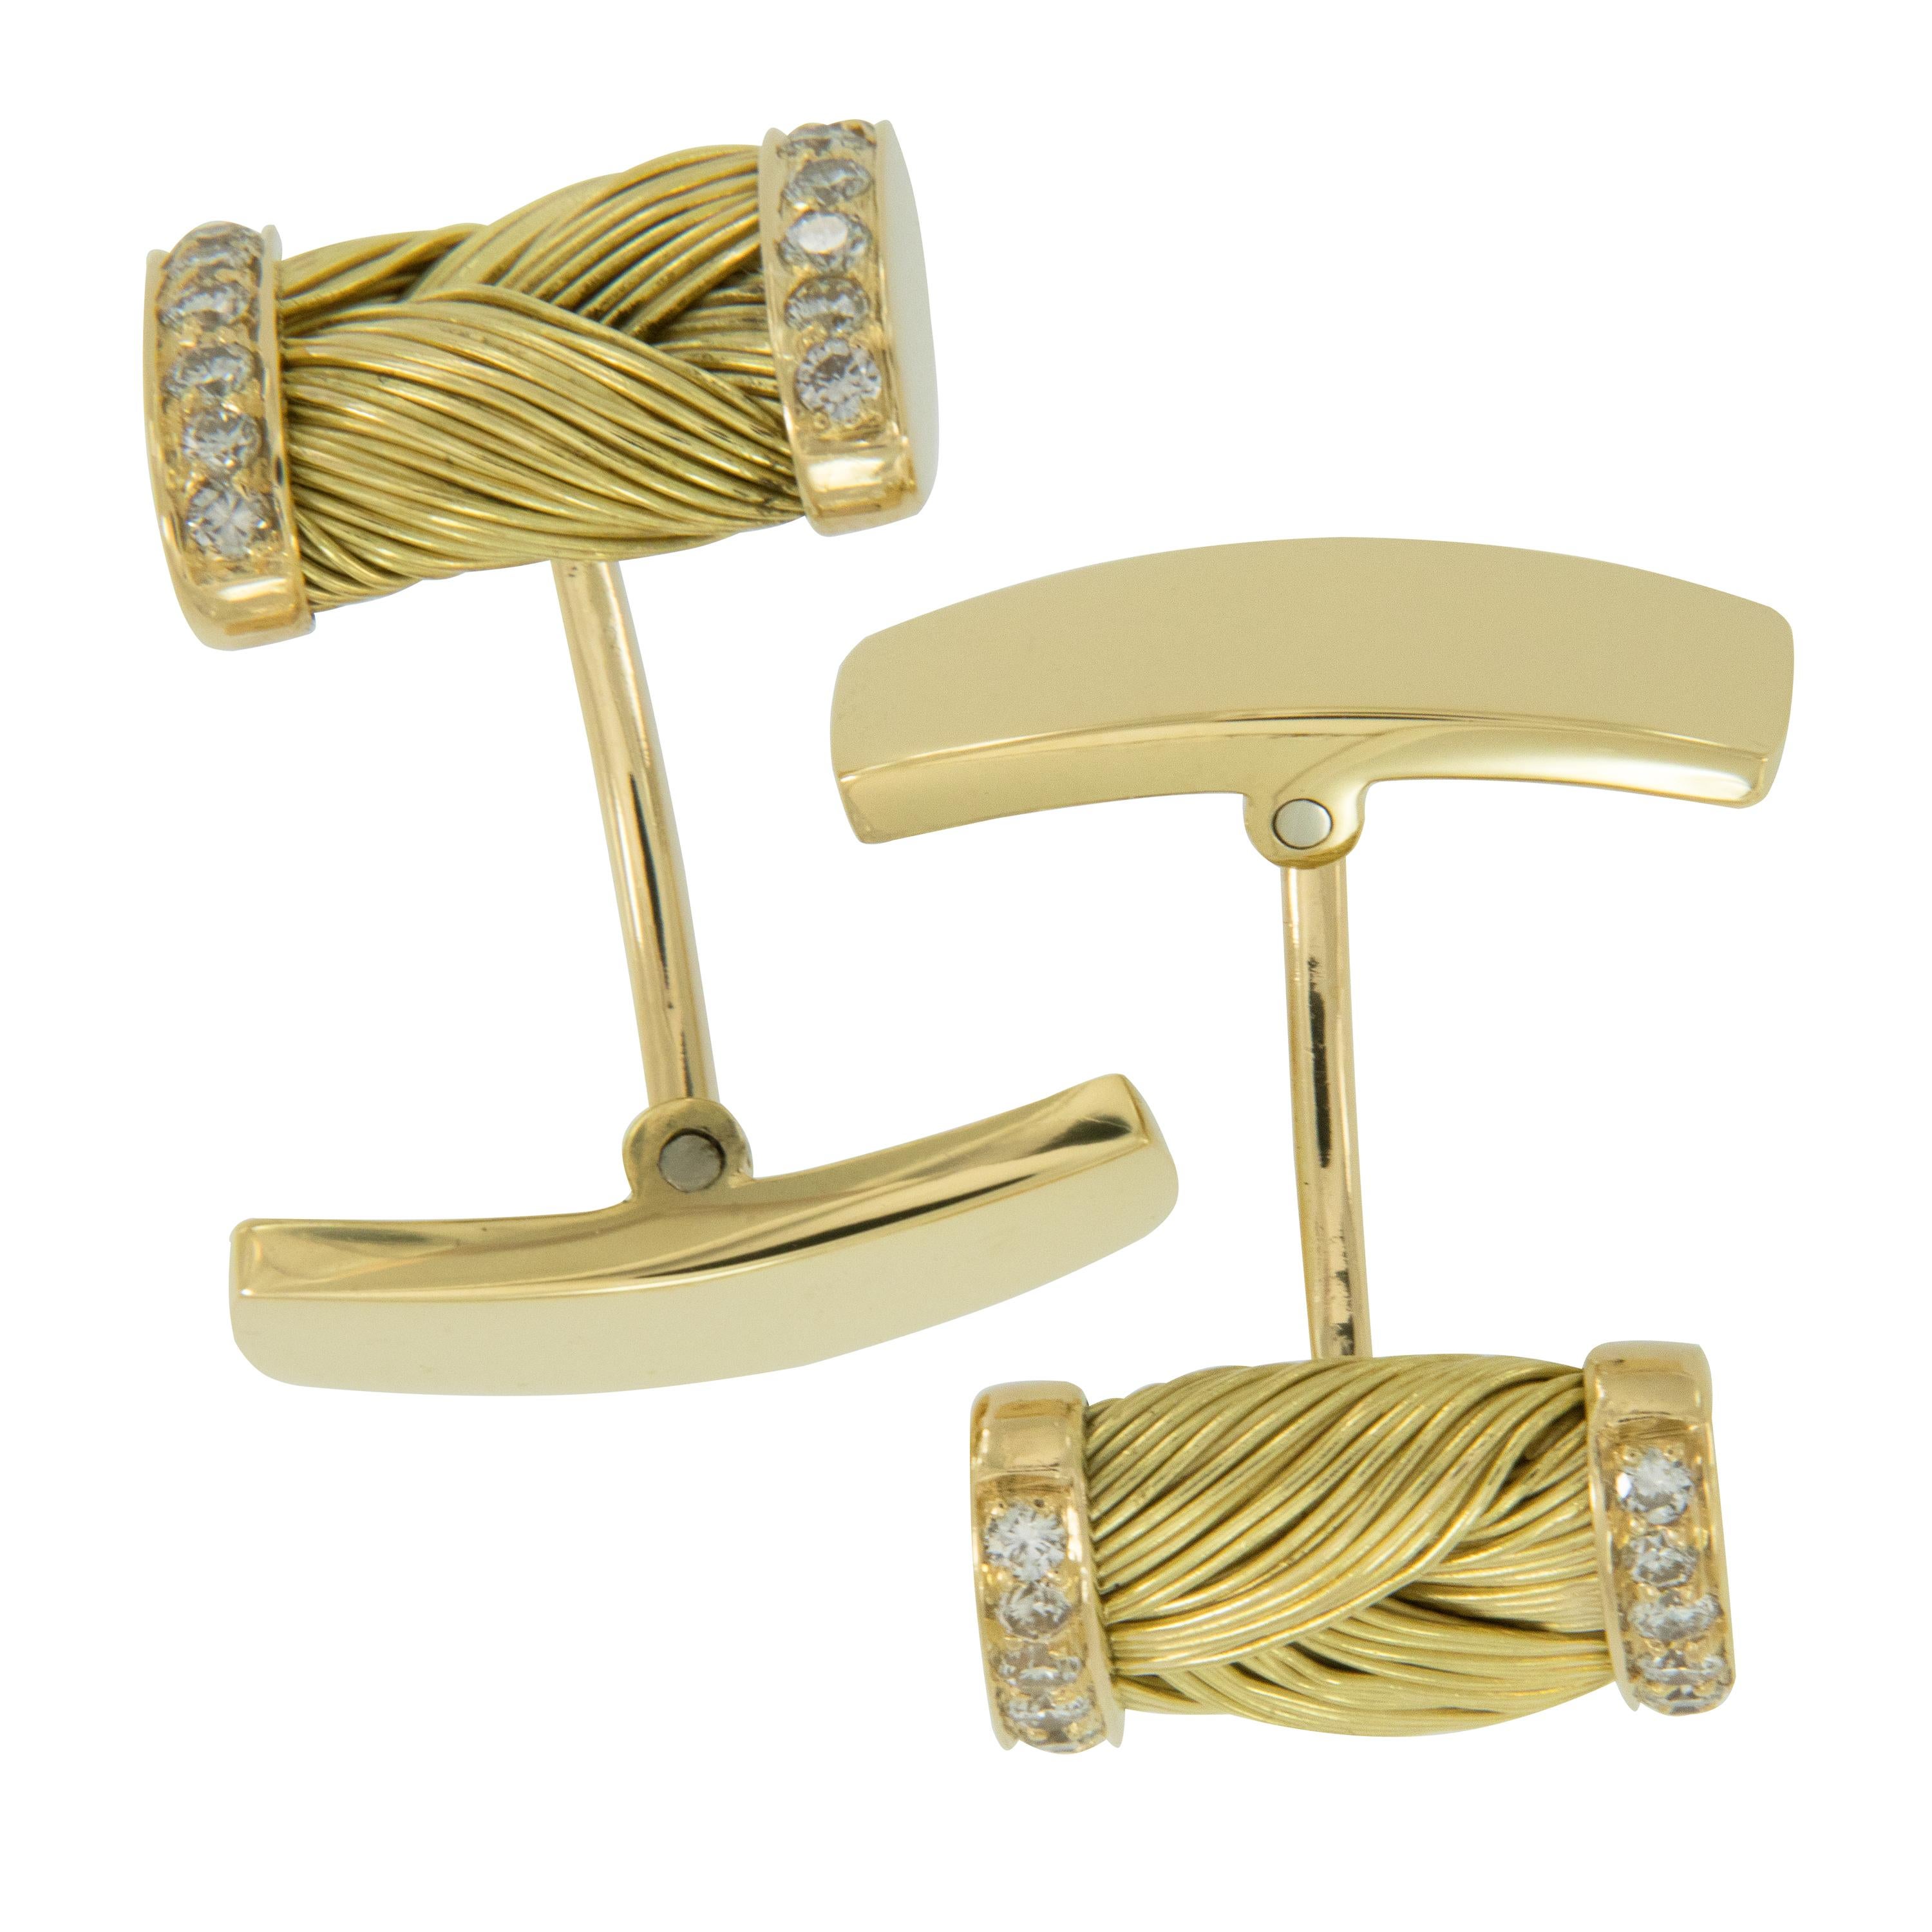 This cufflink & shirt stud set is for the sophisticated man with an impeccable eye for true craftmanship. With proper dressing coming to the forefront of fashion this set would be a perfect acquirement for the holidays! Individual 18 karat gold